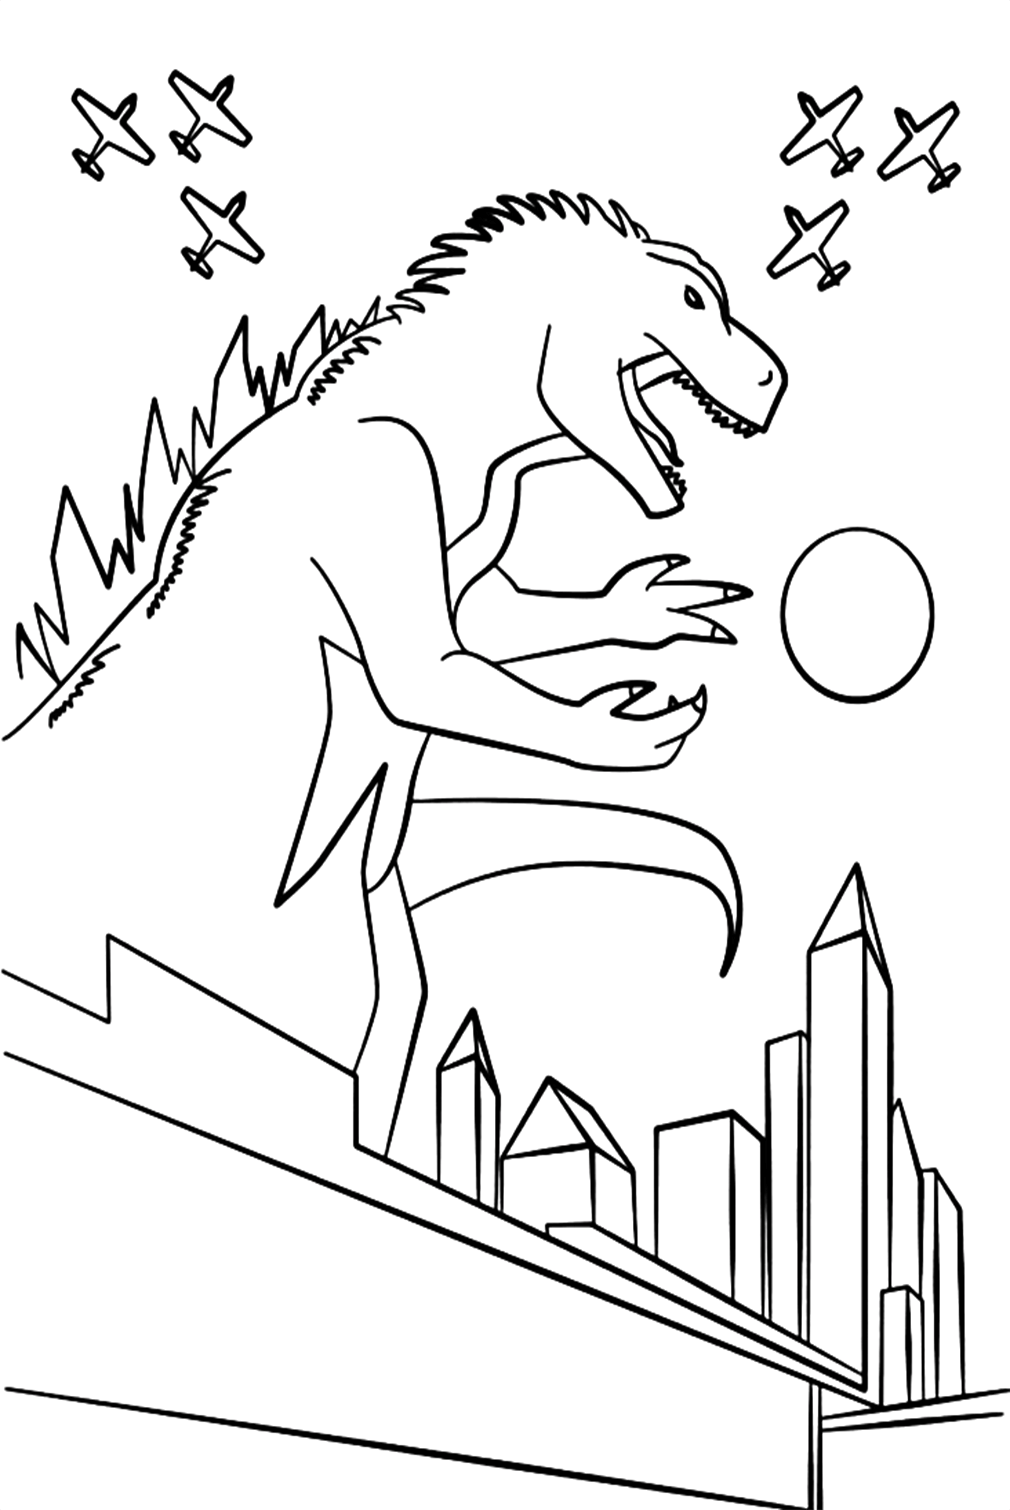 Godzilla In The City Coloring Pages